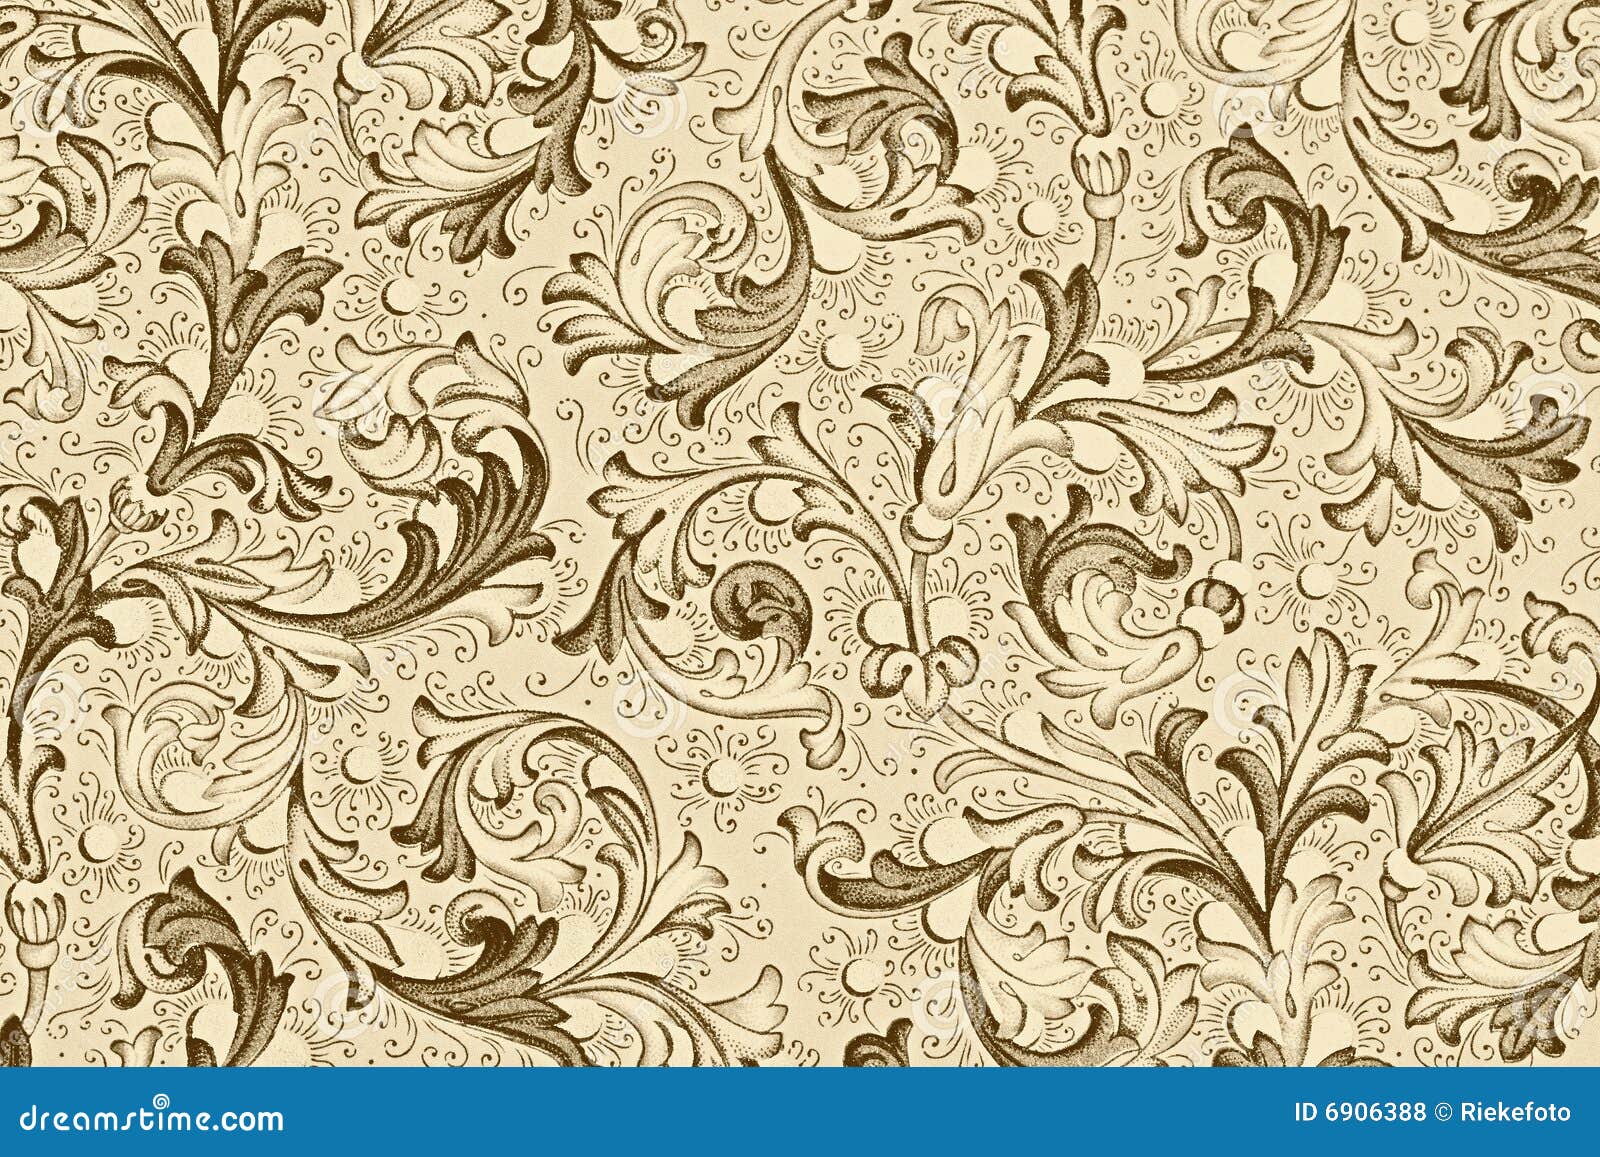 Antique Wallpaper with Floral Pattern Stock Illustration - Illustration of  century, 19th: 6906388